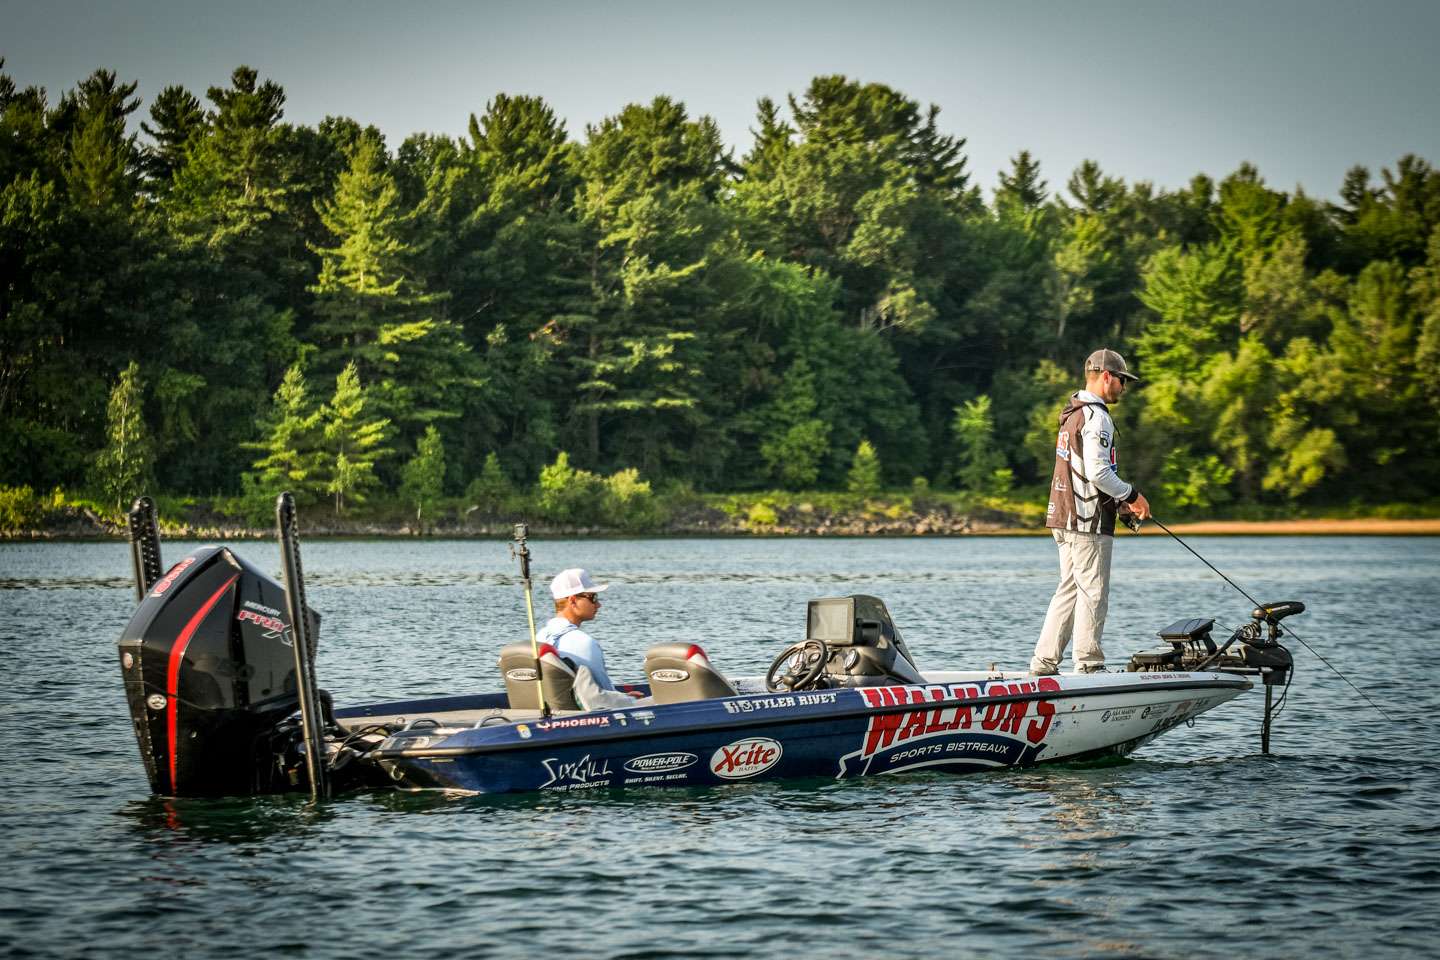 Follow along with even more Elites as they hit the midday mark of Day 1 of the 2021 Farmers Insurance Bassmaster Elite at St. Lawrence River!